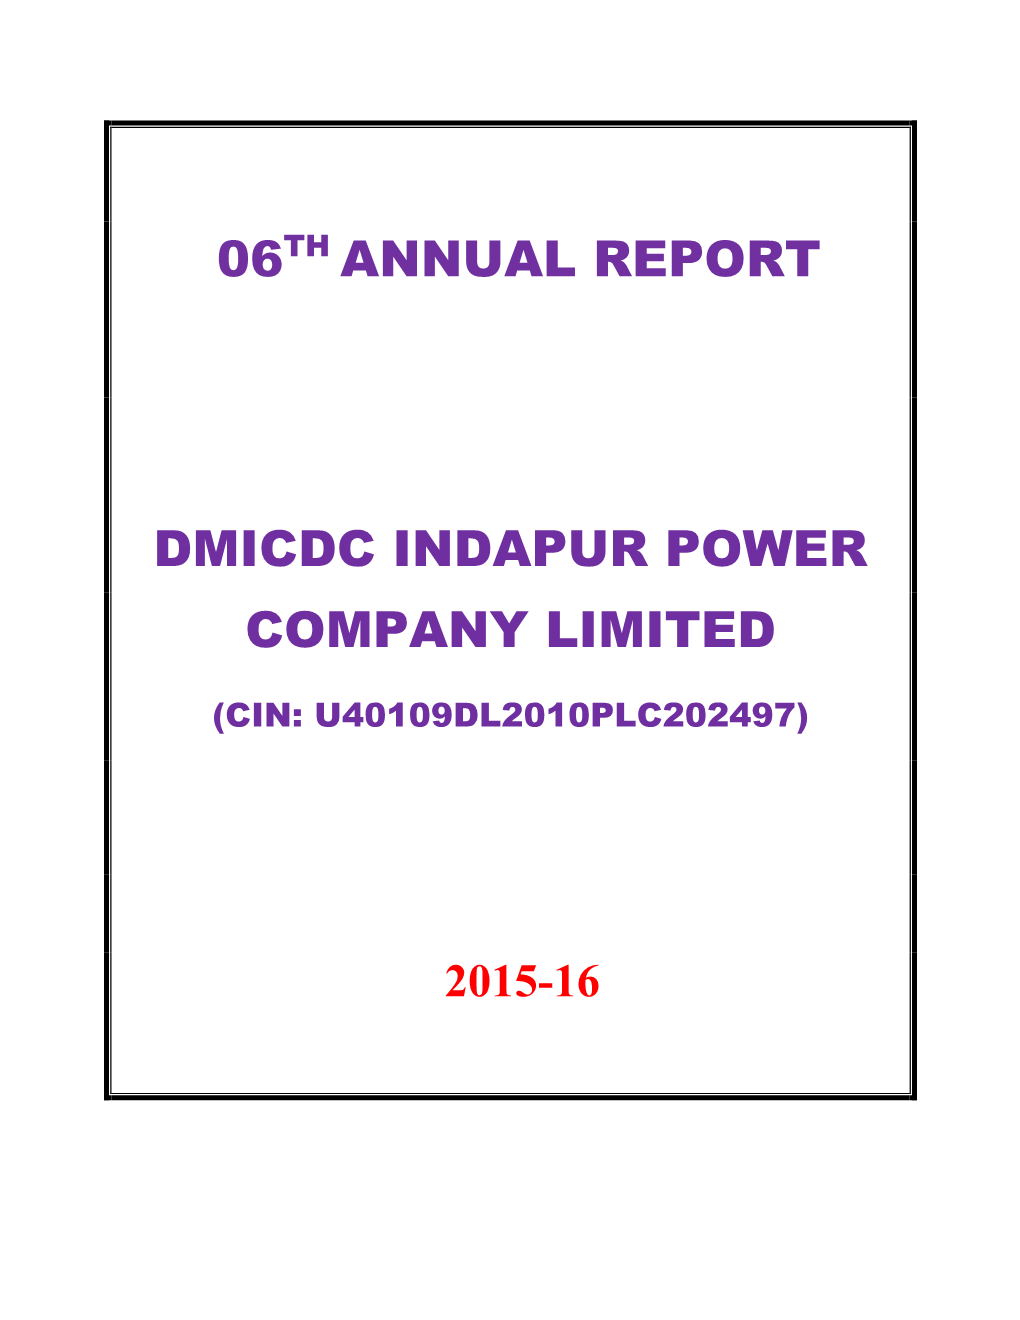 Dmicdc Indapur Power Company Limited